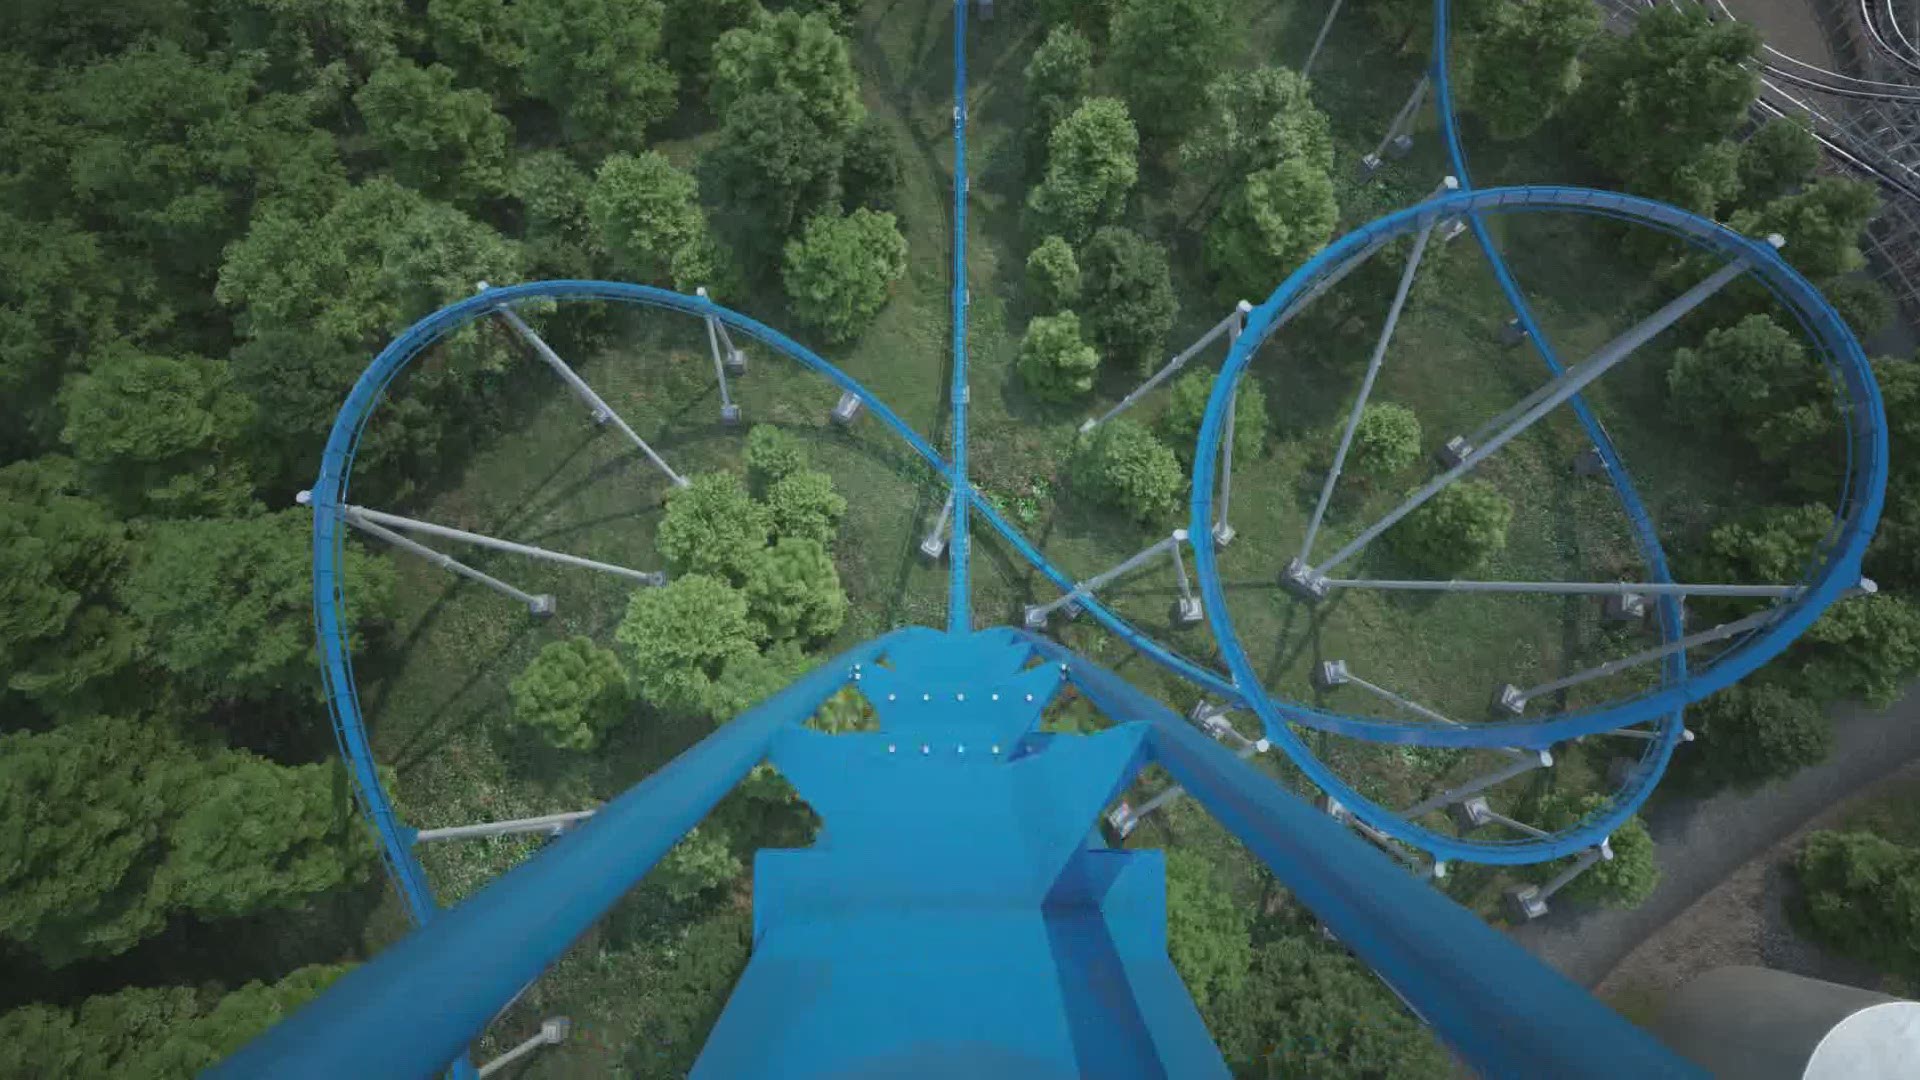 Take a virtual ride on the new Orion roller coaster coming to Kings Island in 2020. Orion will be the Cincinnati park's first giga coaster, featuring a 300-foot-tall first drop with speeds topping out at 91 mph. The attraction is 5,321 feet long with seven airtime hills.